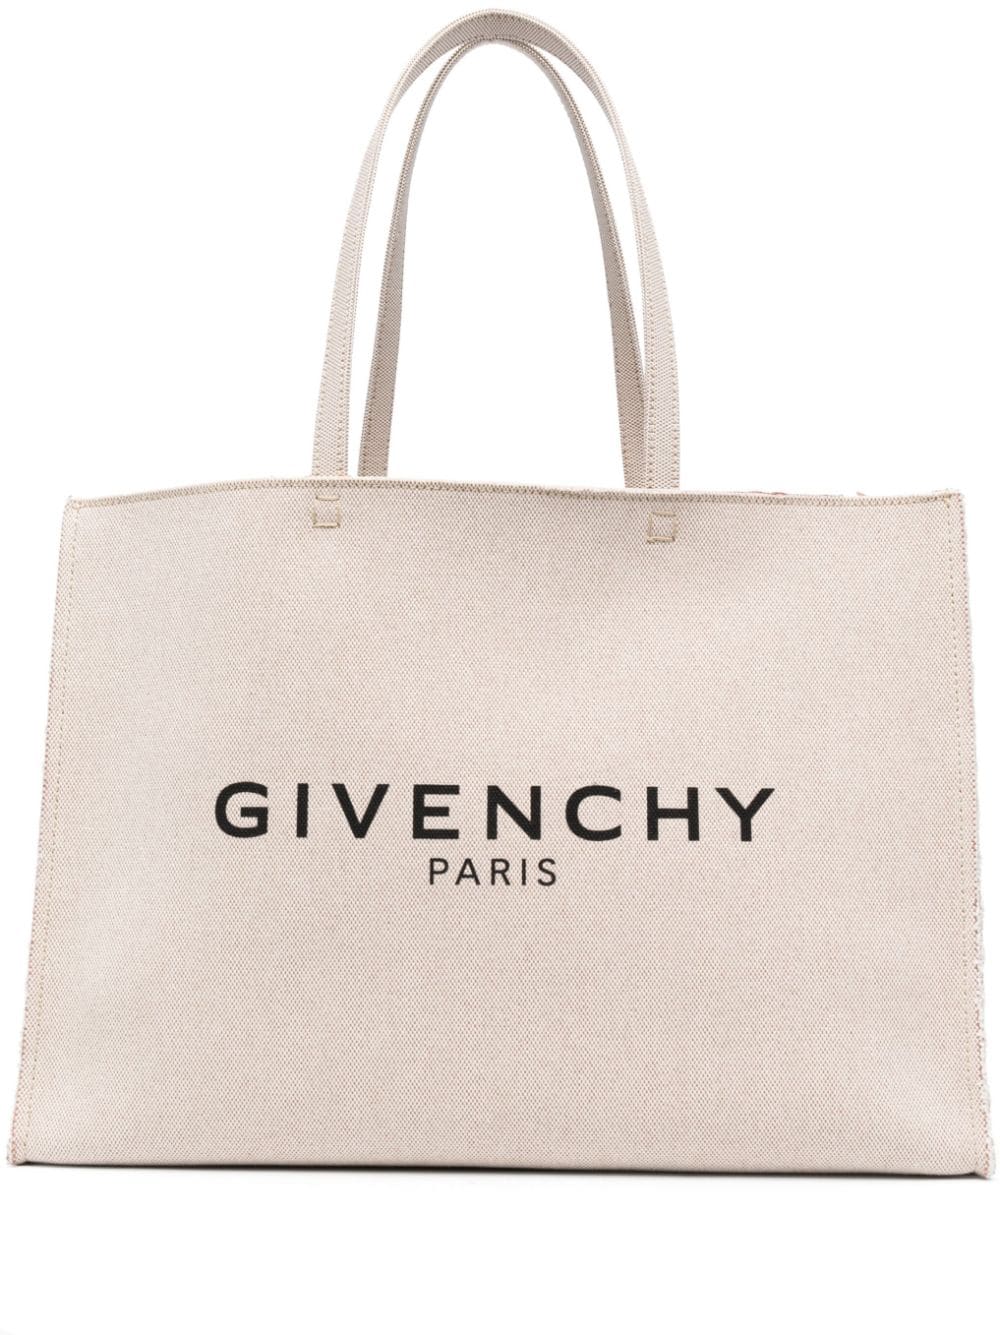 Shop Givenchy Logo-print Canvas Tote Handbag In Beige And Black For Women In Tan